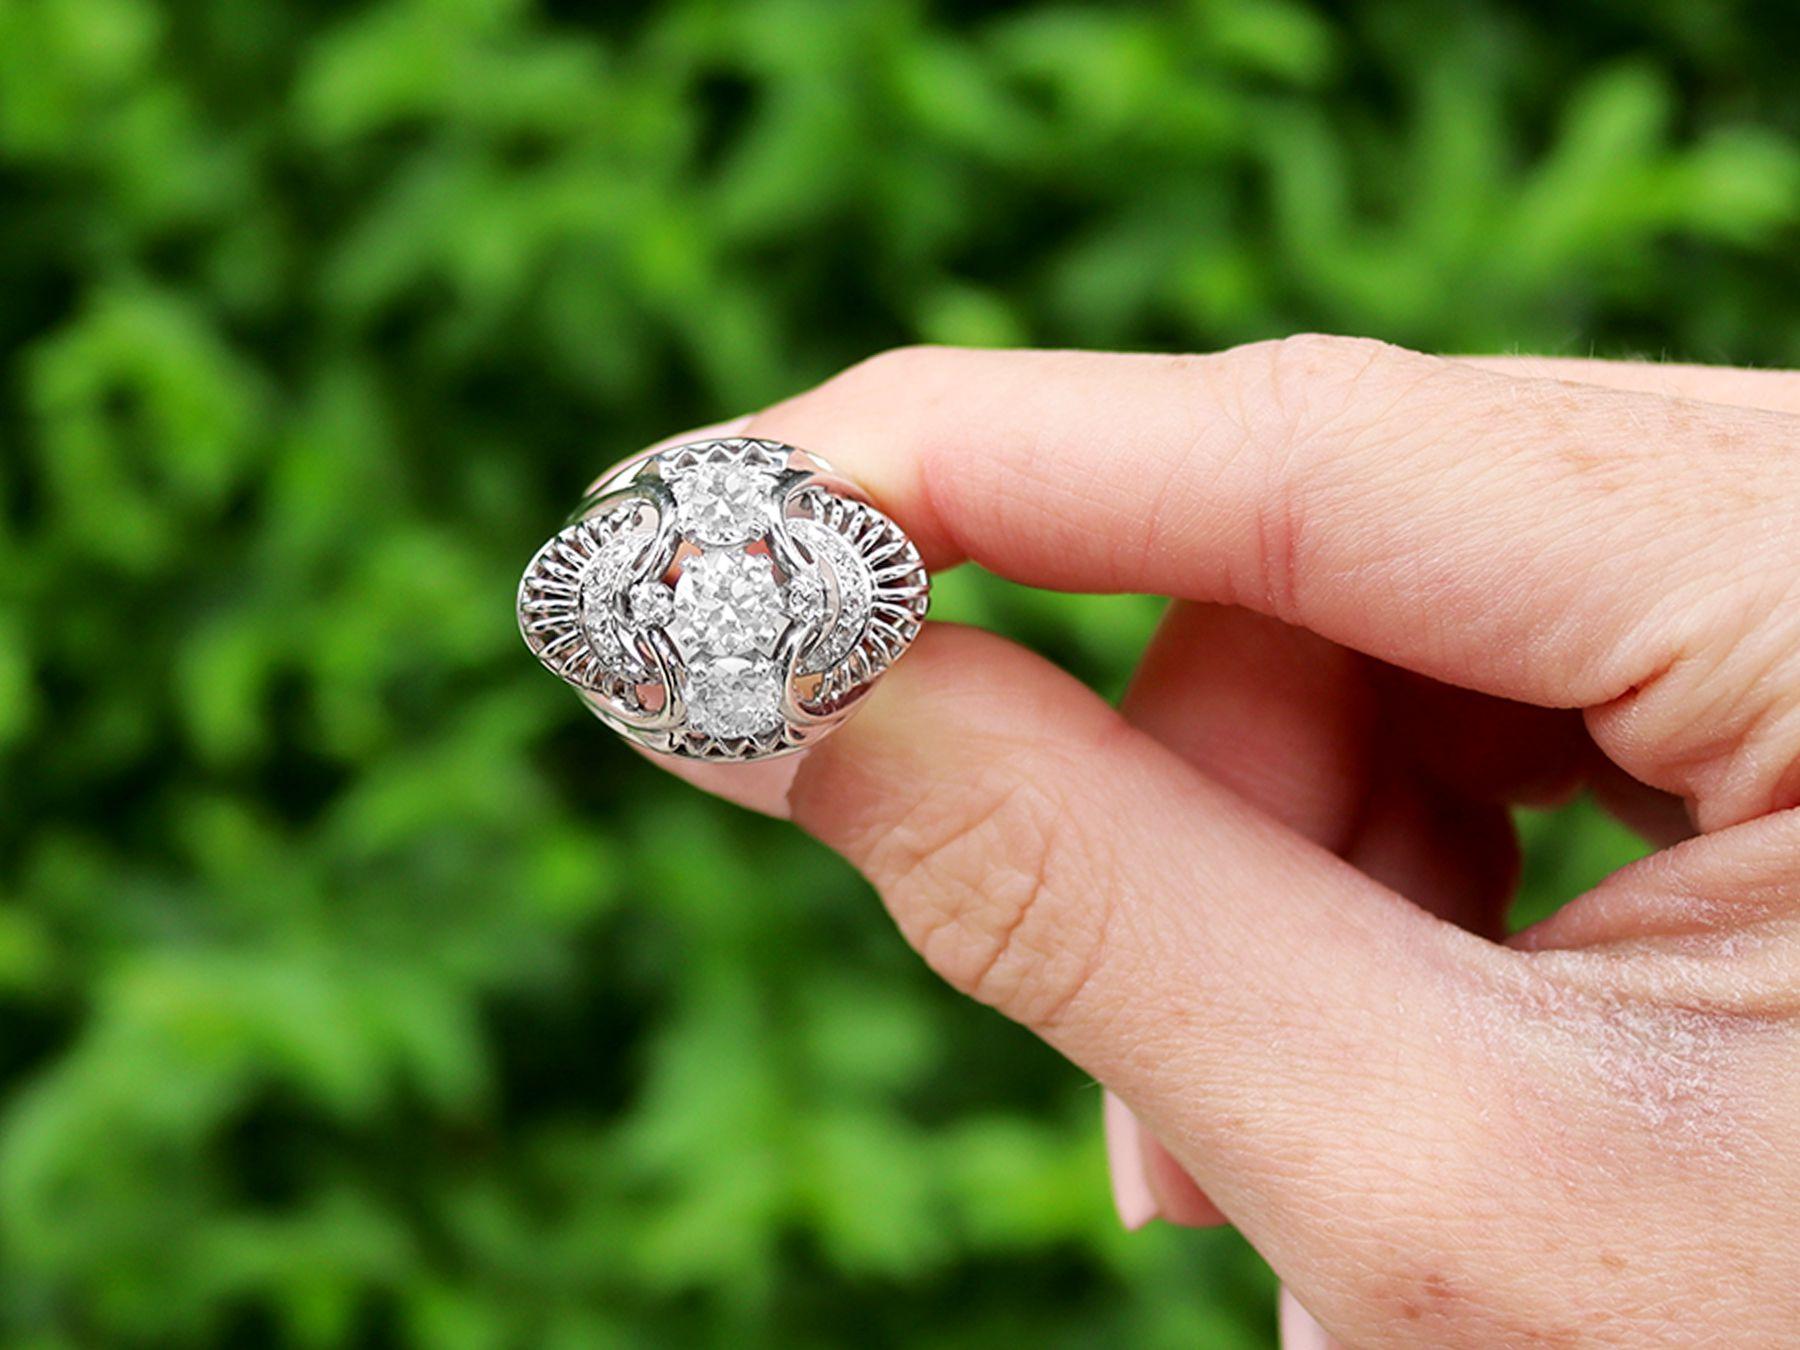 A stunning, fine and impressive 1.59 carat diamond and platinum dress ring; part of our diverse diamond jewellery and estate jewelry collections

This stunning, fine and impressive antique diamond ring has been crafted in platinum.

The impressive